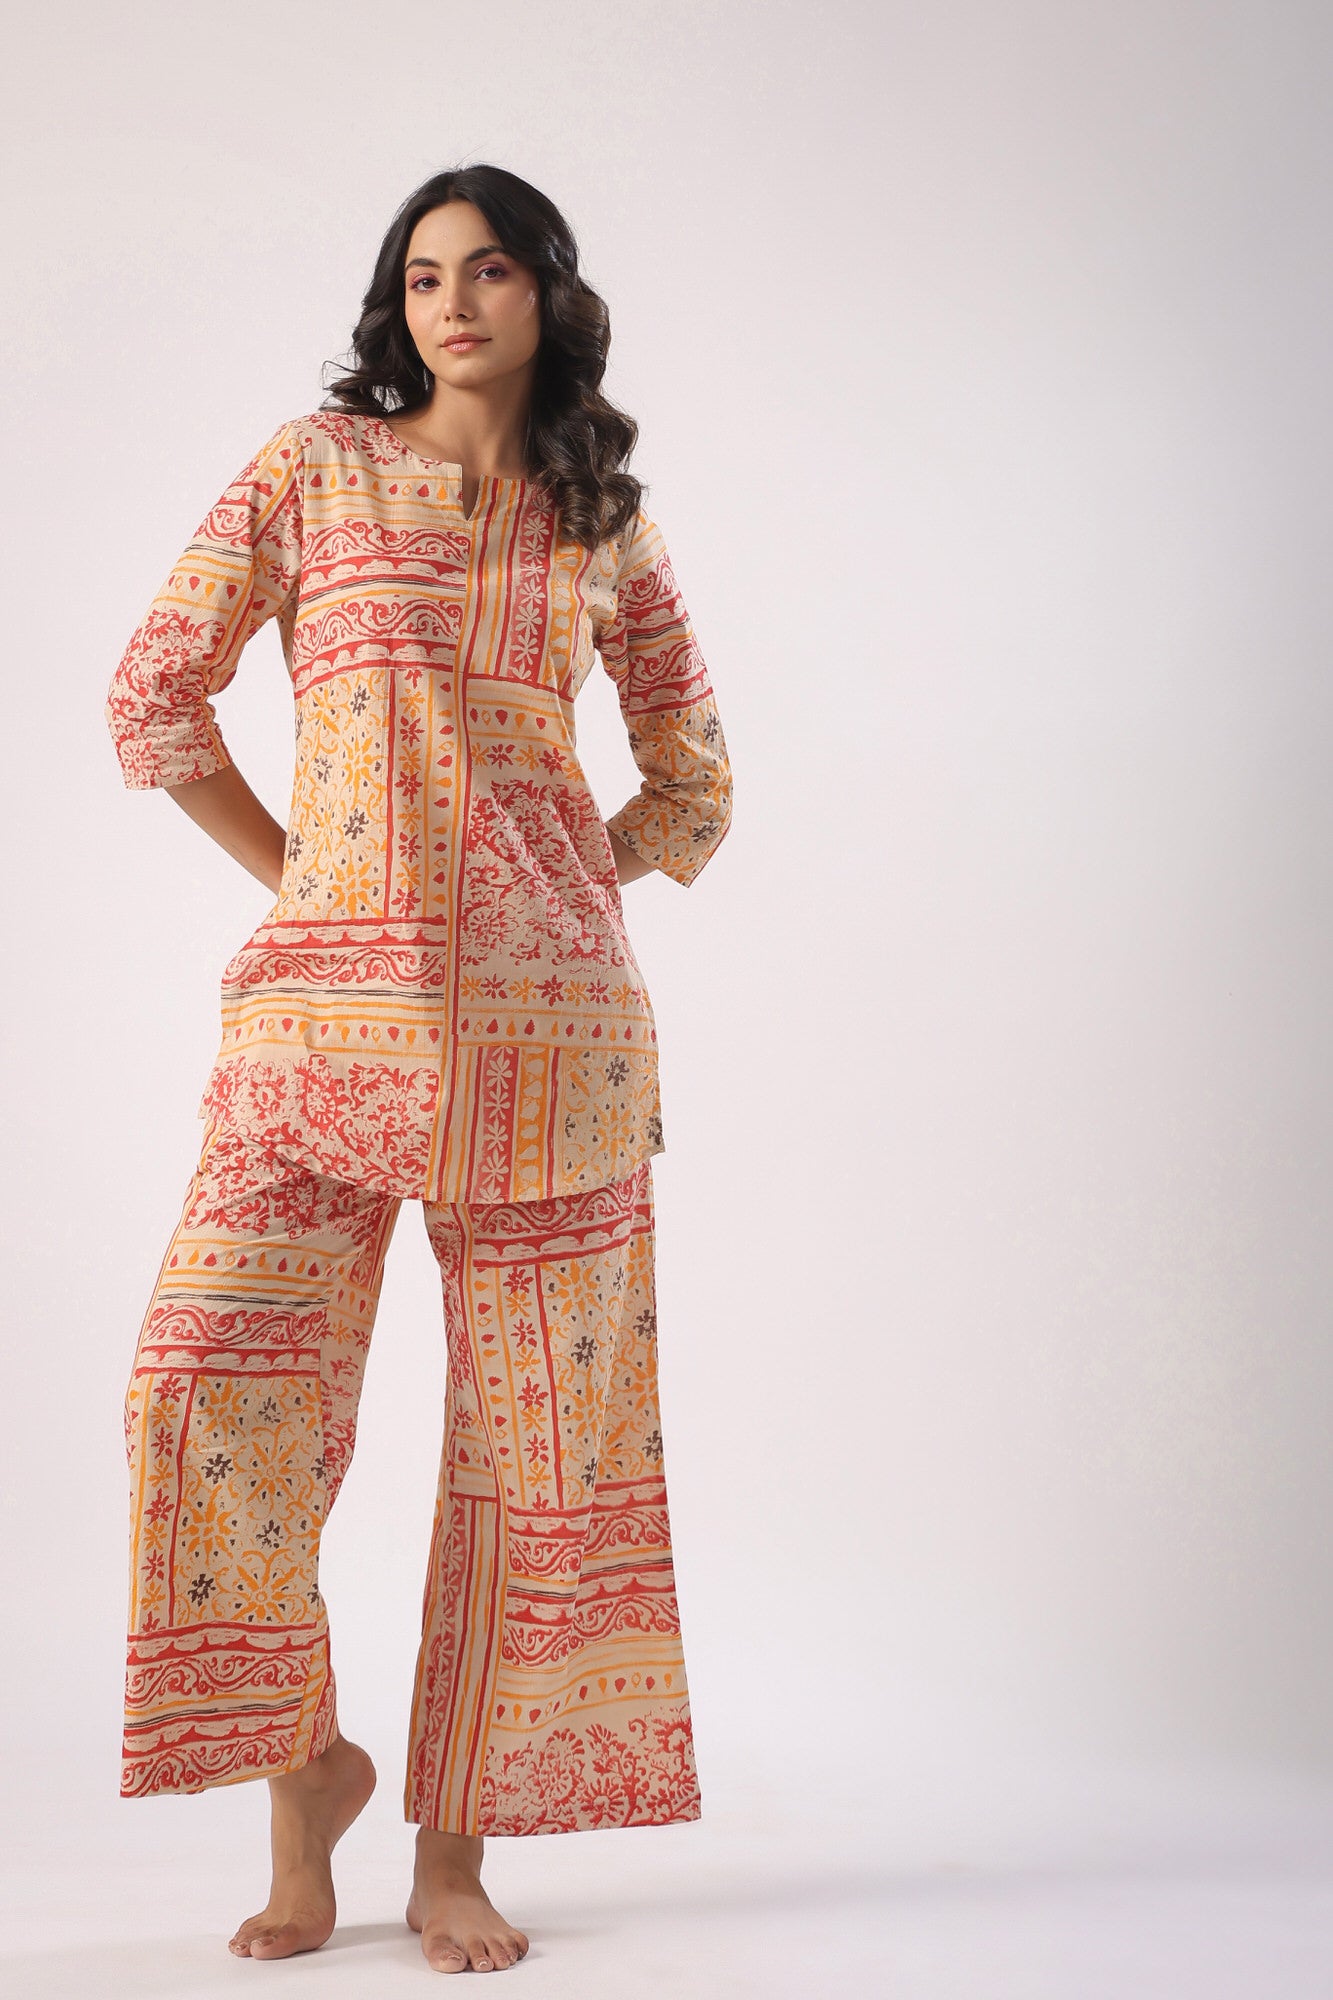 Doodle Patches on Beige Lounge Co-ord Set